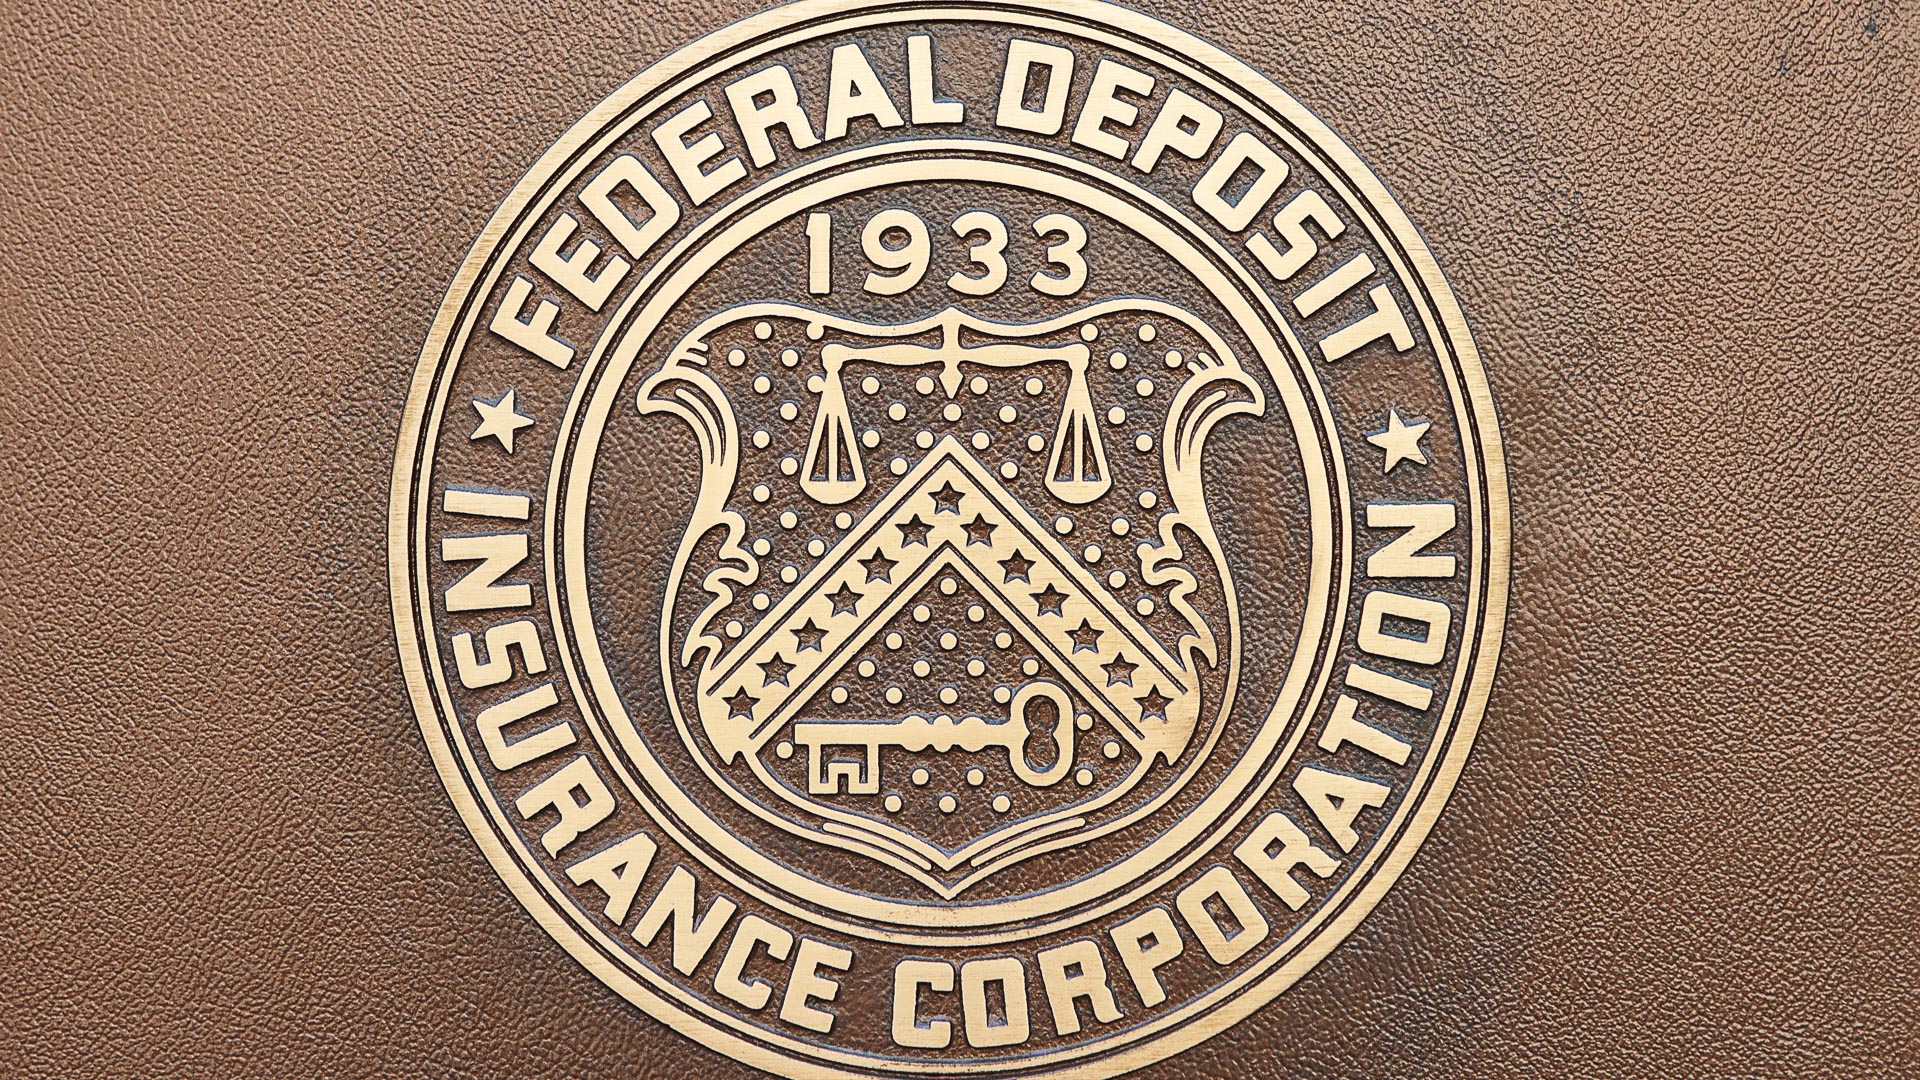 Ncua Vs Fdic Who Insures Credit Unions And Banks Gobankingrates